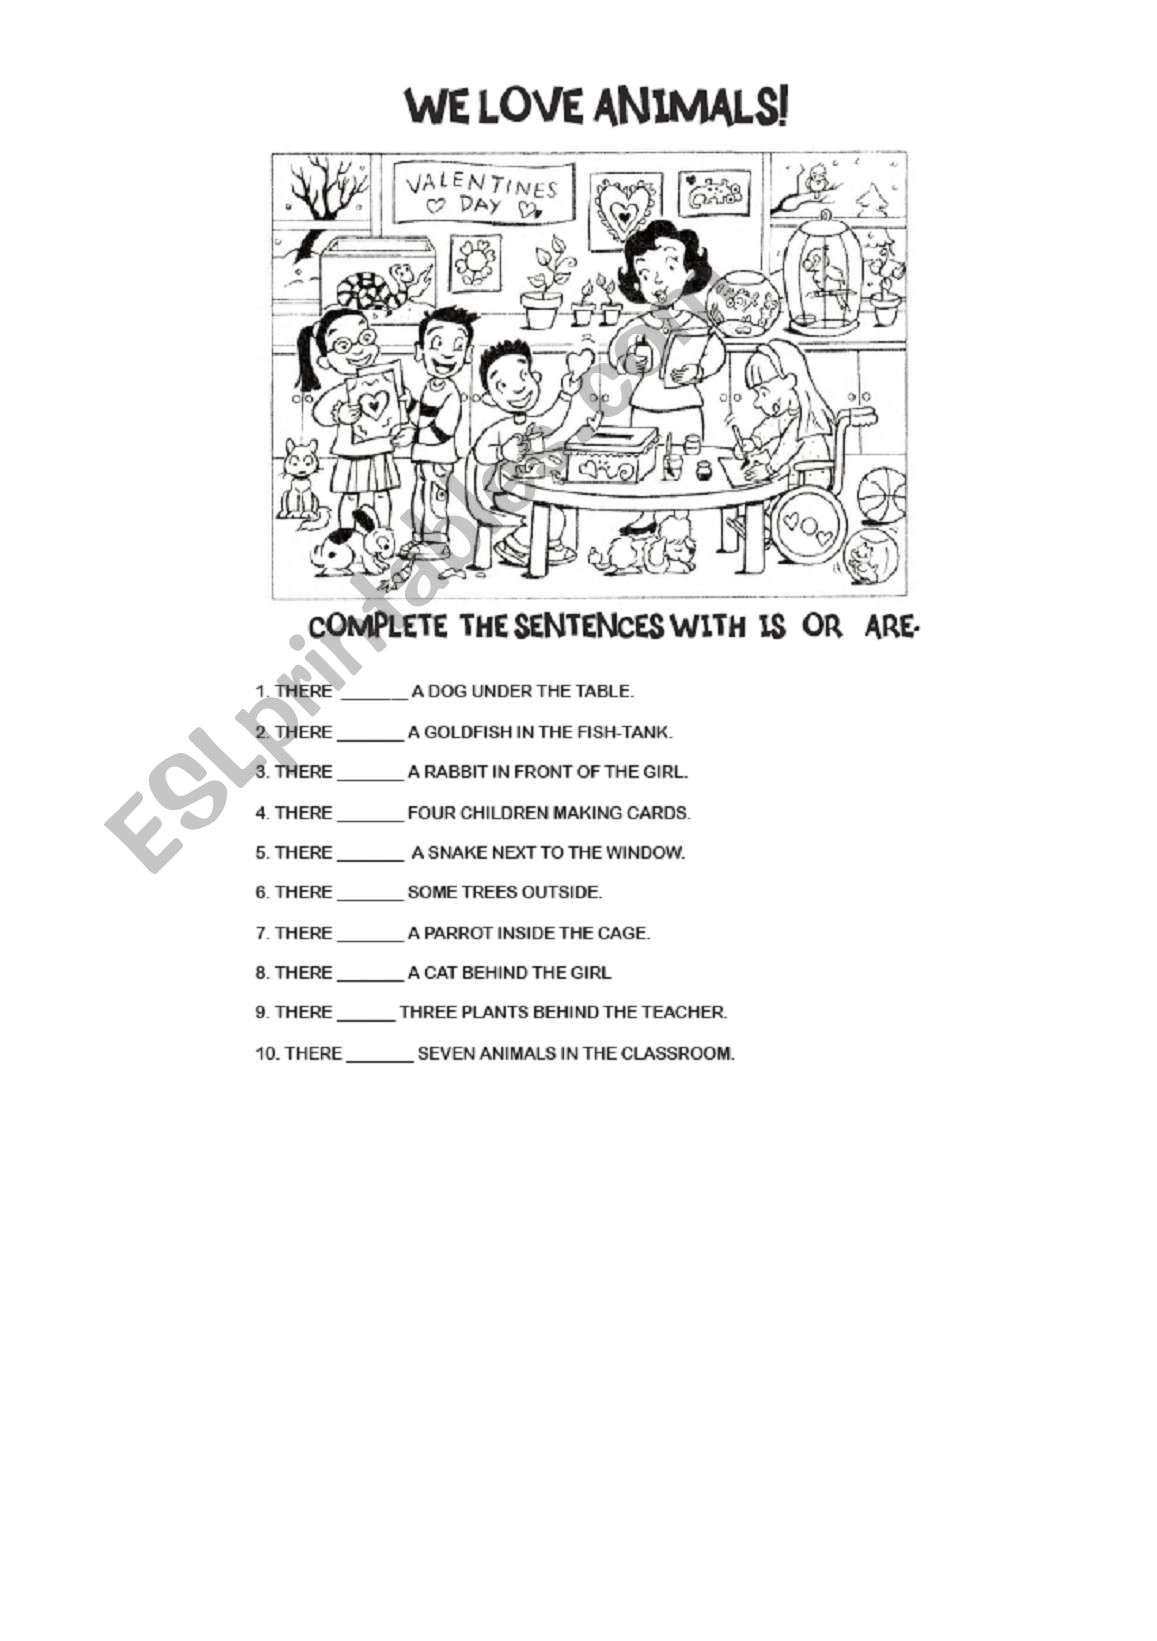 Animals in the classroom worksheet